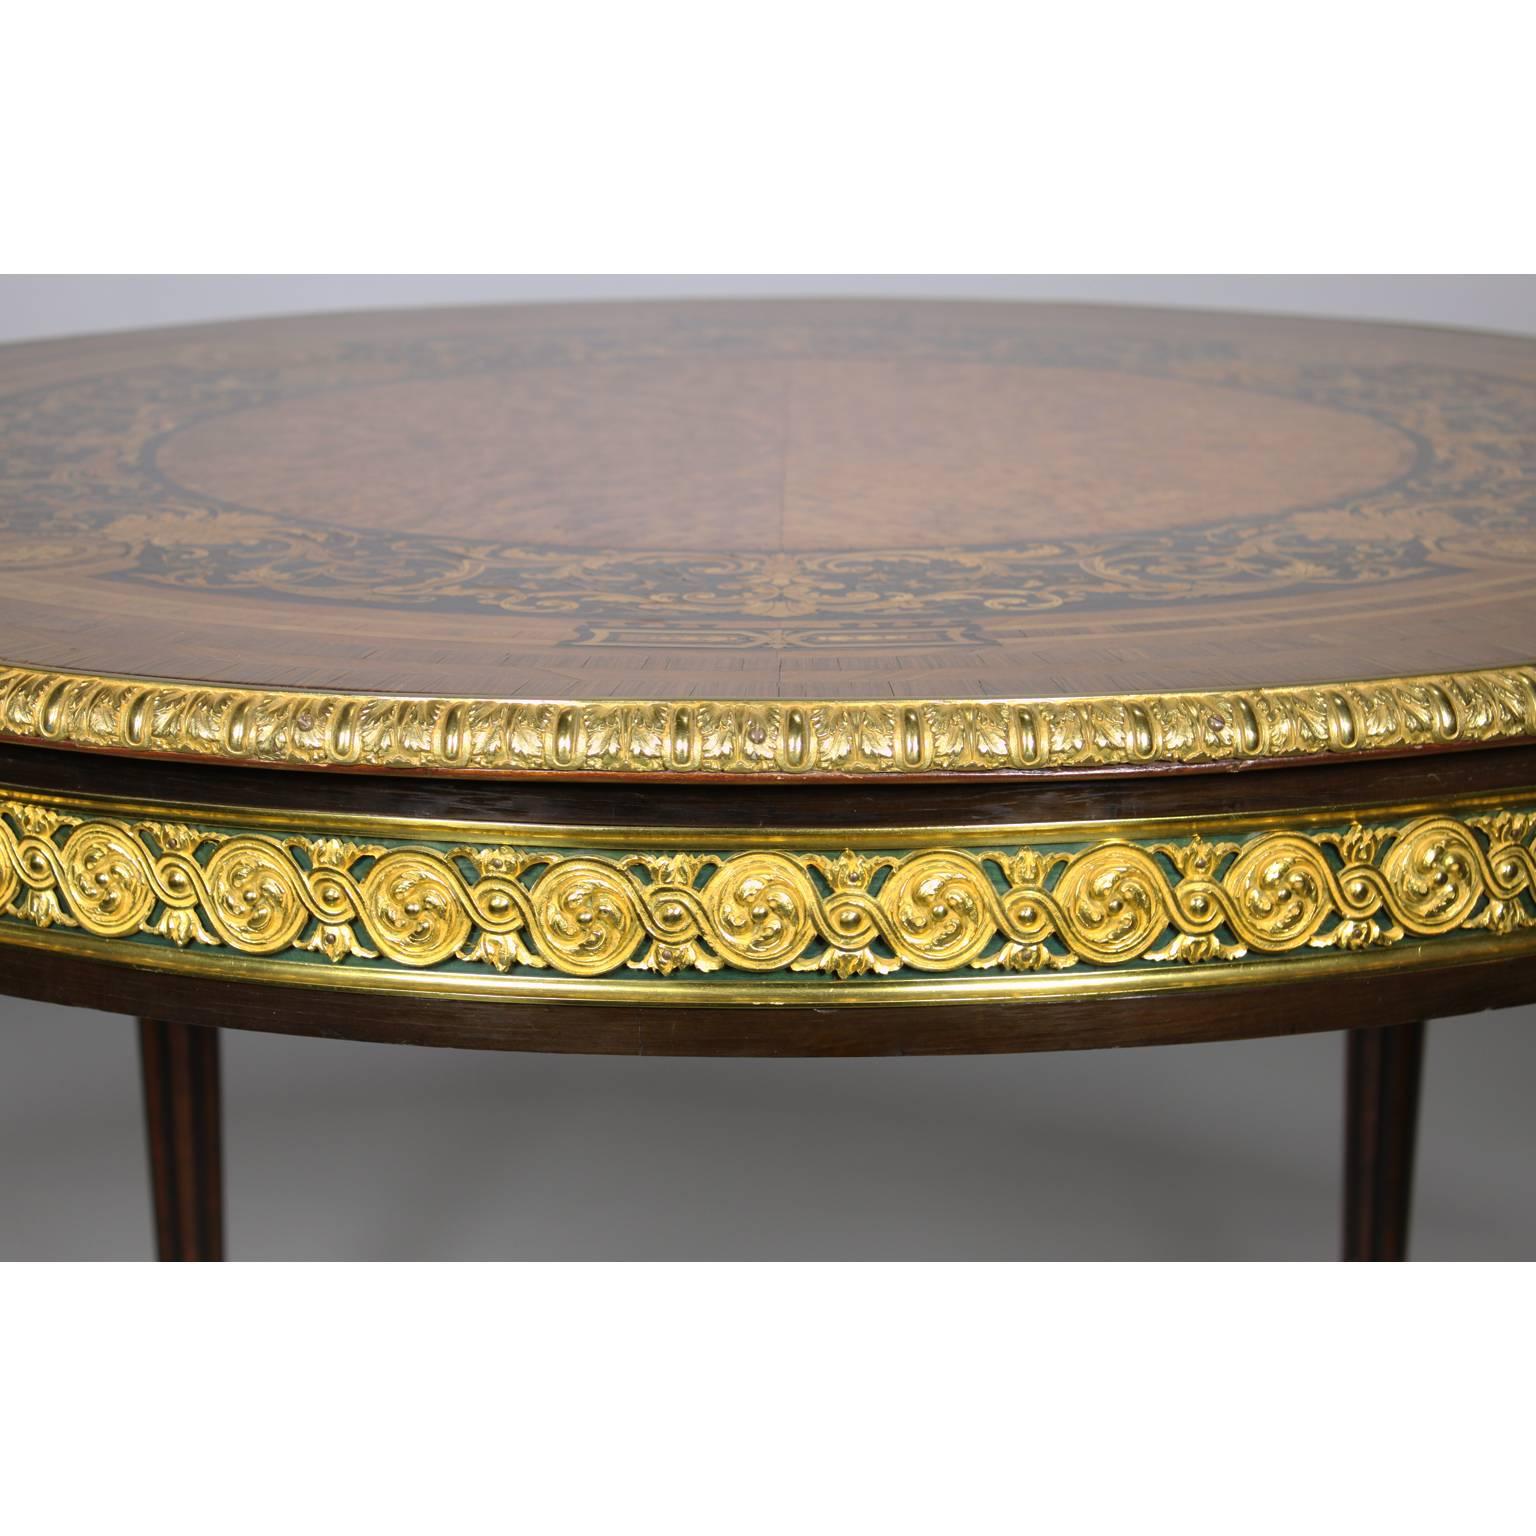 French 19th Century Louis XVI Style Gilt-Bronze Mounted Marquetry Center Table For Sale 3